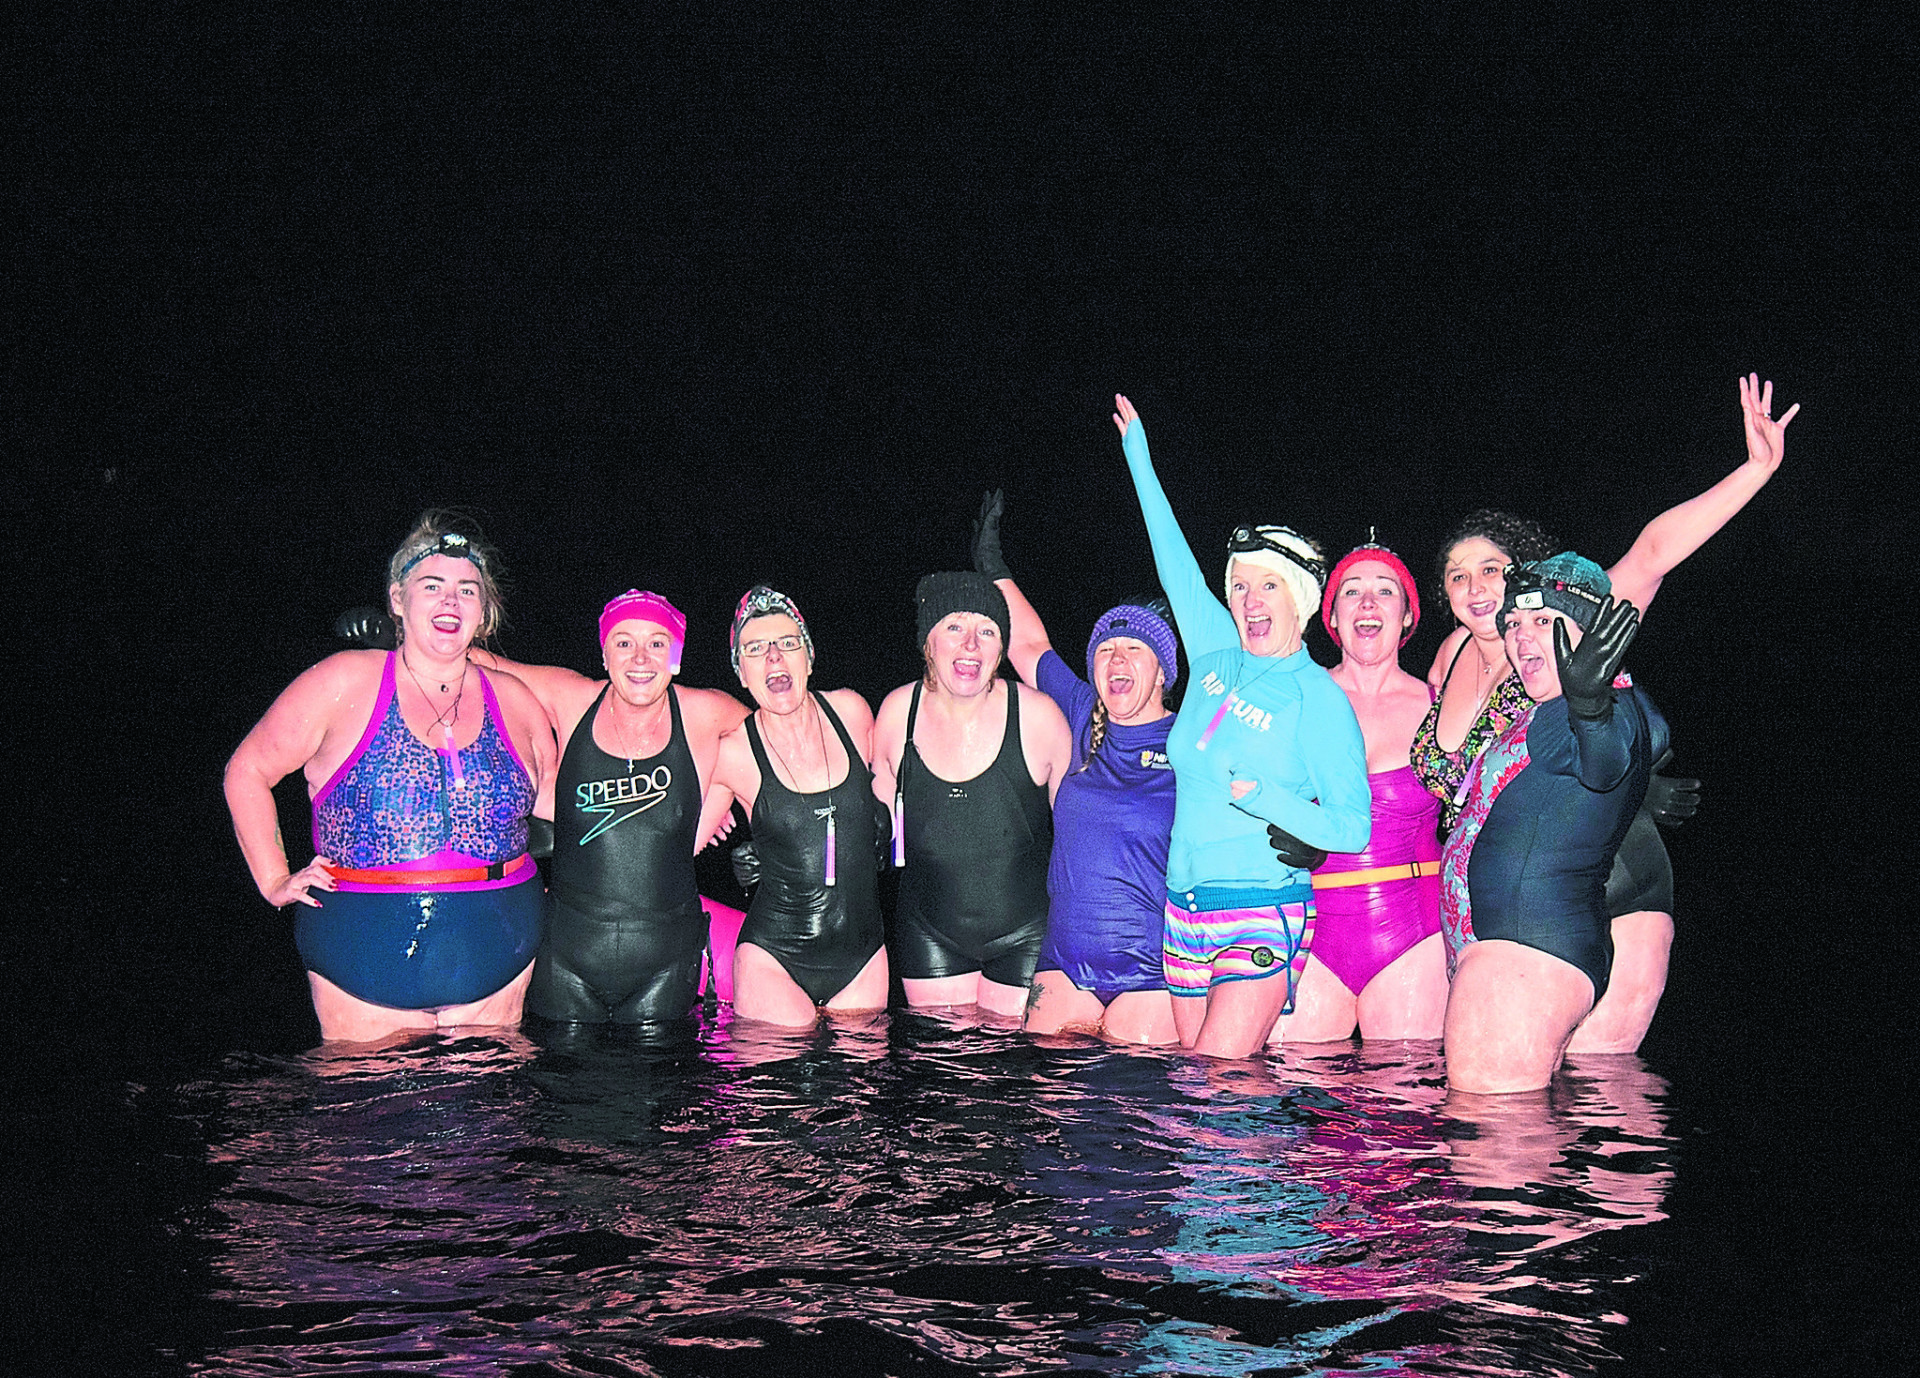 Kerry’s ‘chilly dips’ raise more than £1,000 for charity